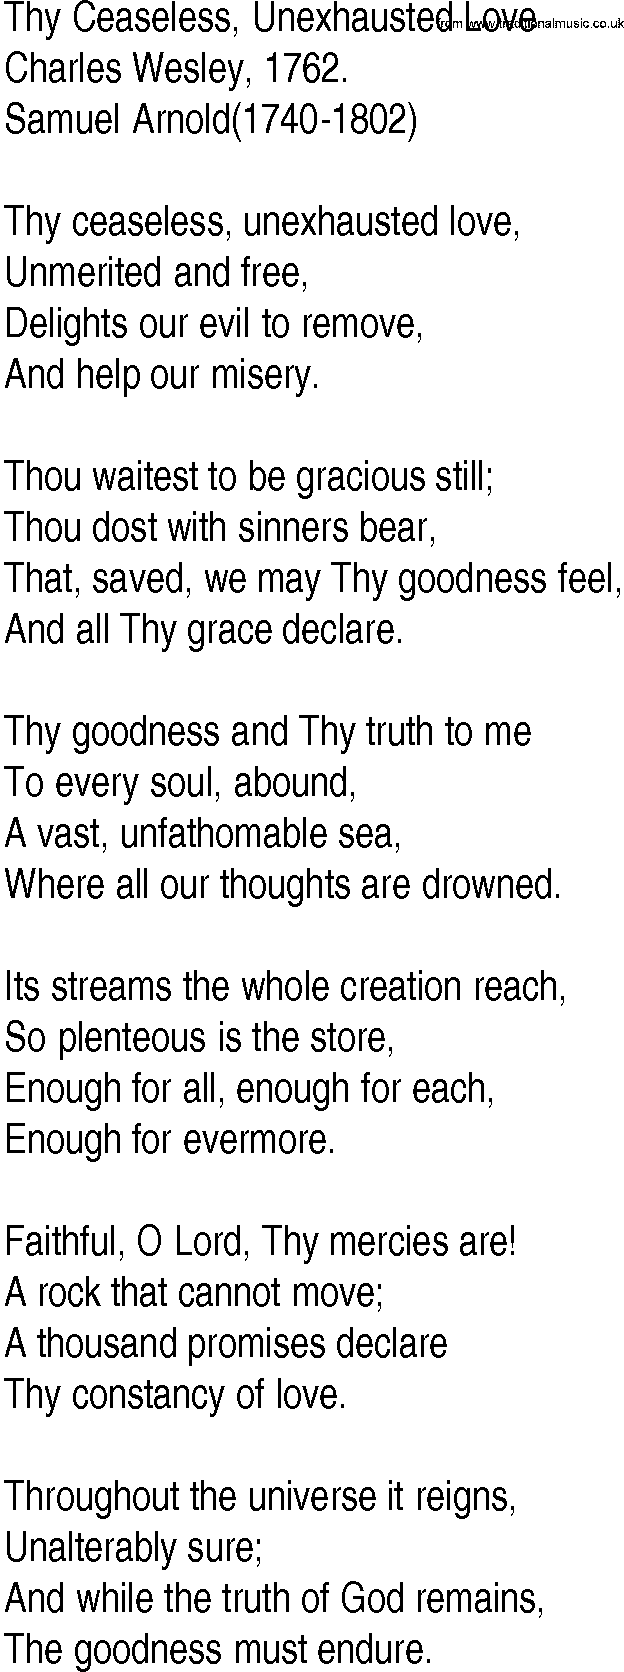 Hymn and Gospel Song: Thy Ceaseless, Unexhausted Love by Charles Wesley lyrics